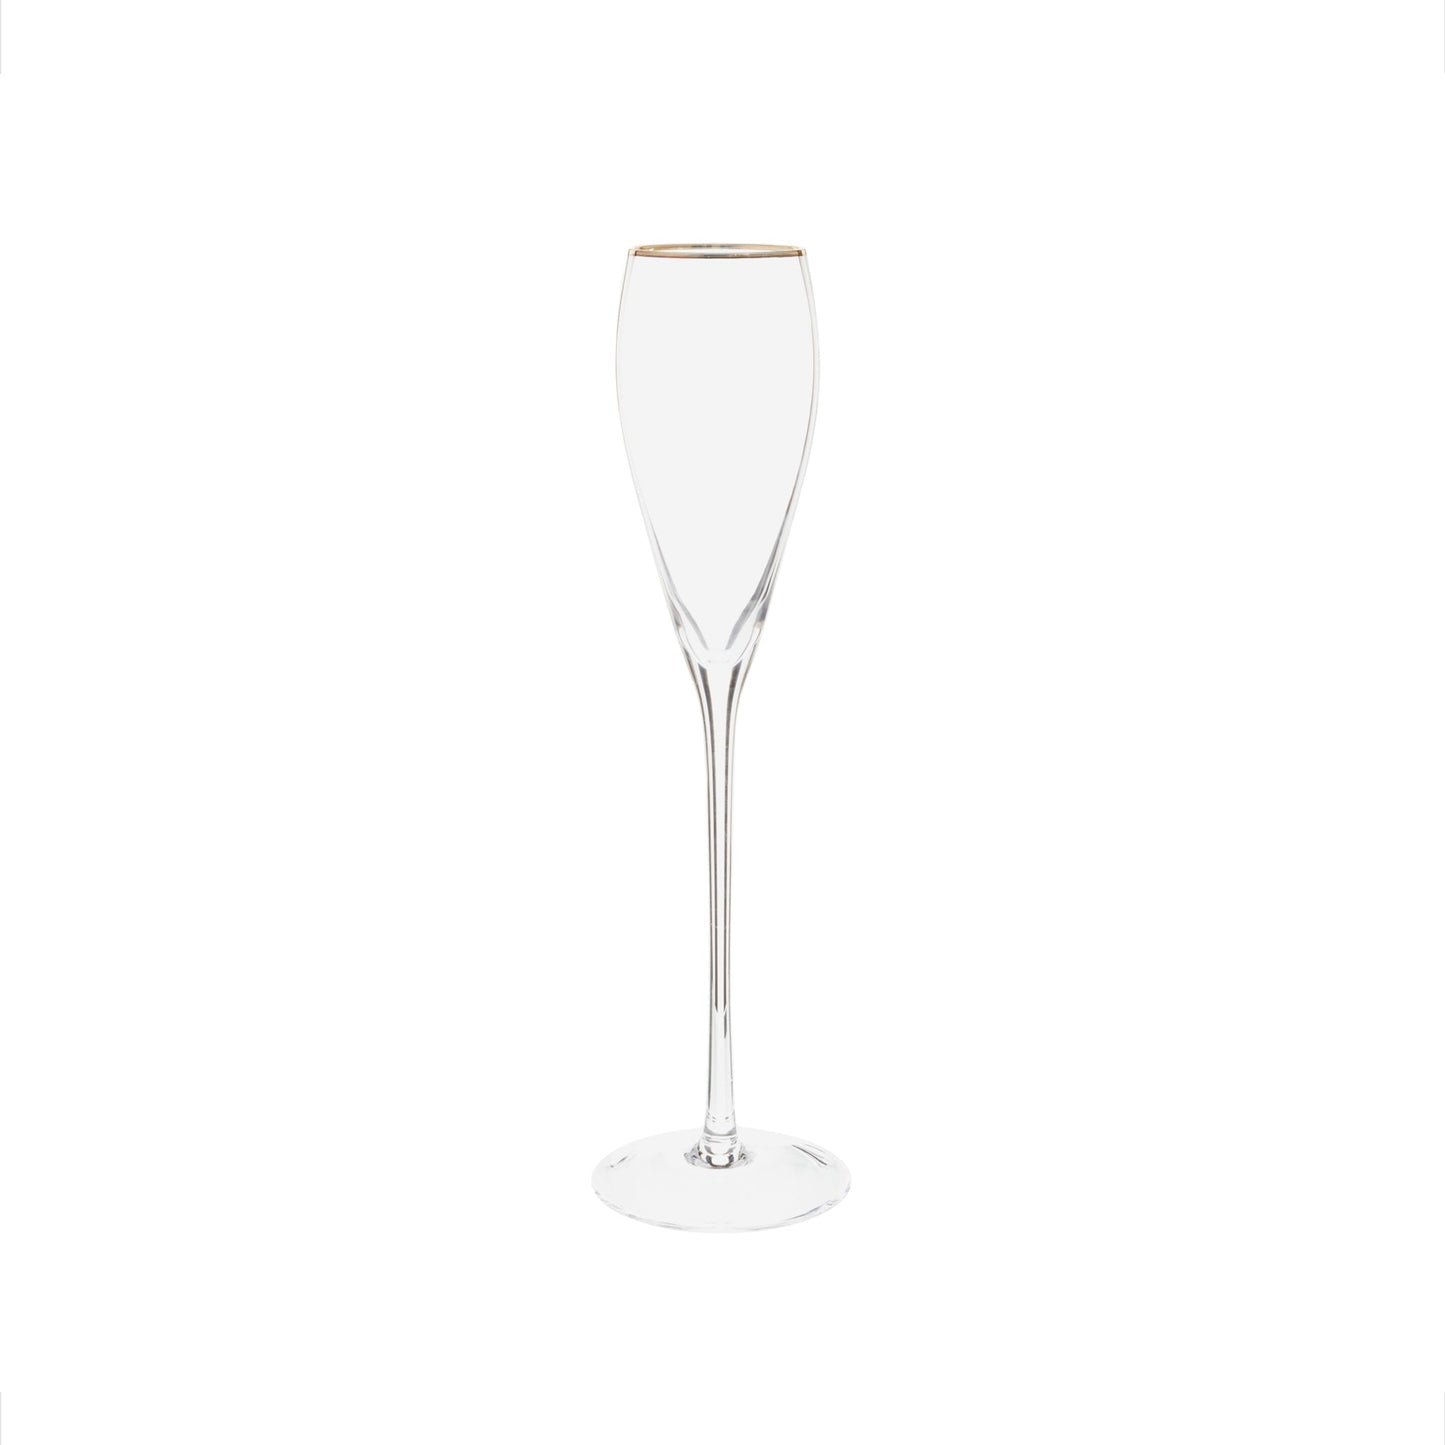 Gold-Rim Tapered Champagne Flutes Set - 8 oz by Creative Gifts